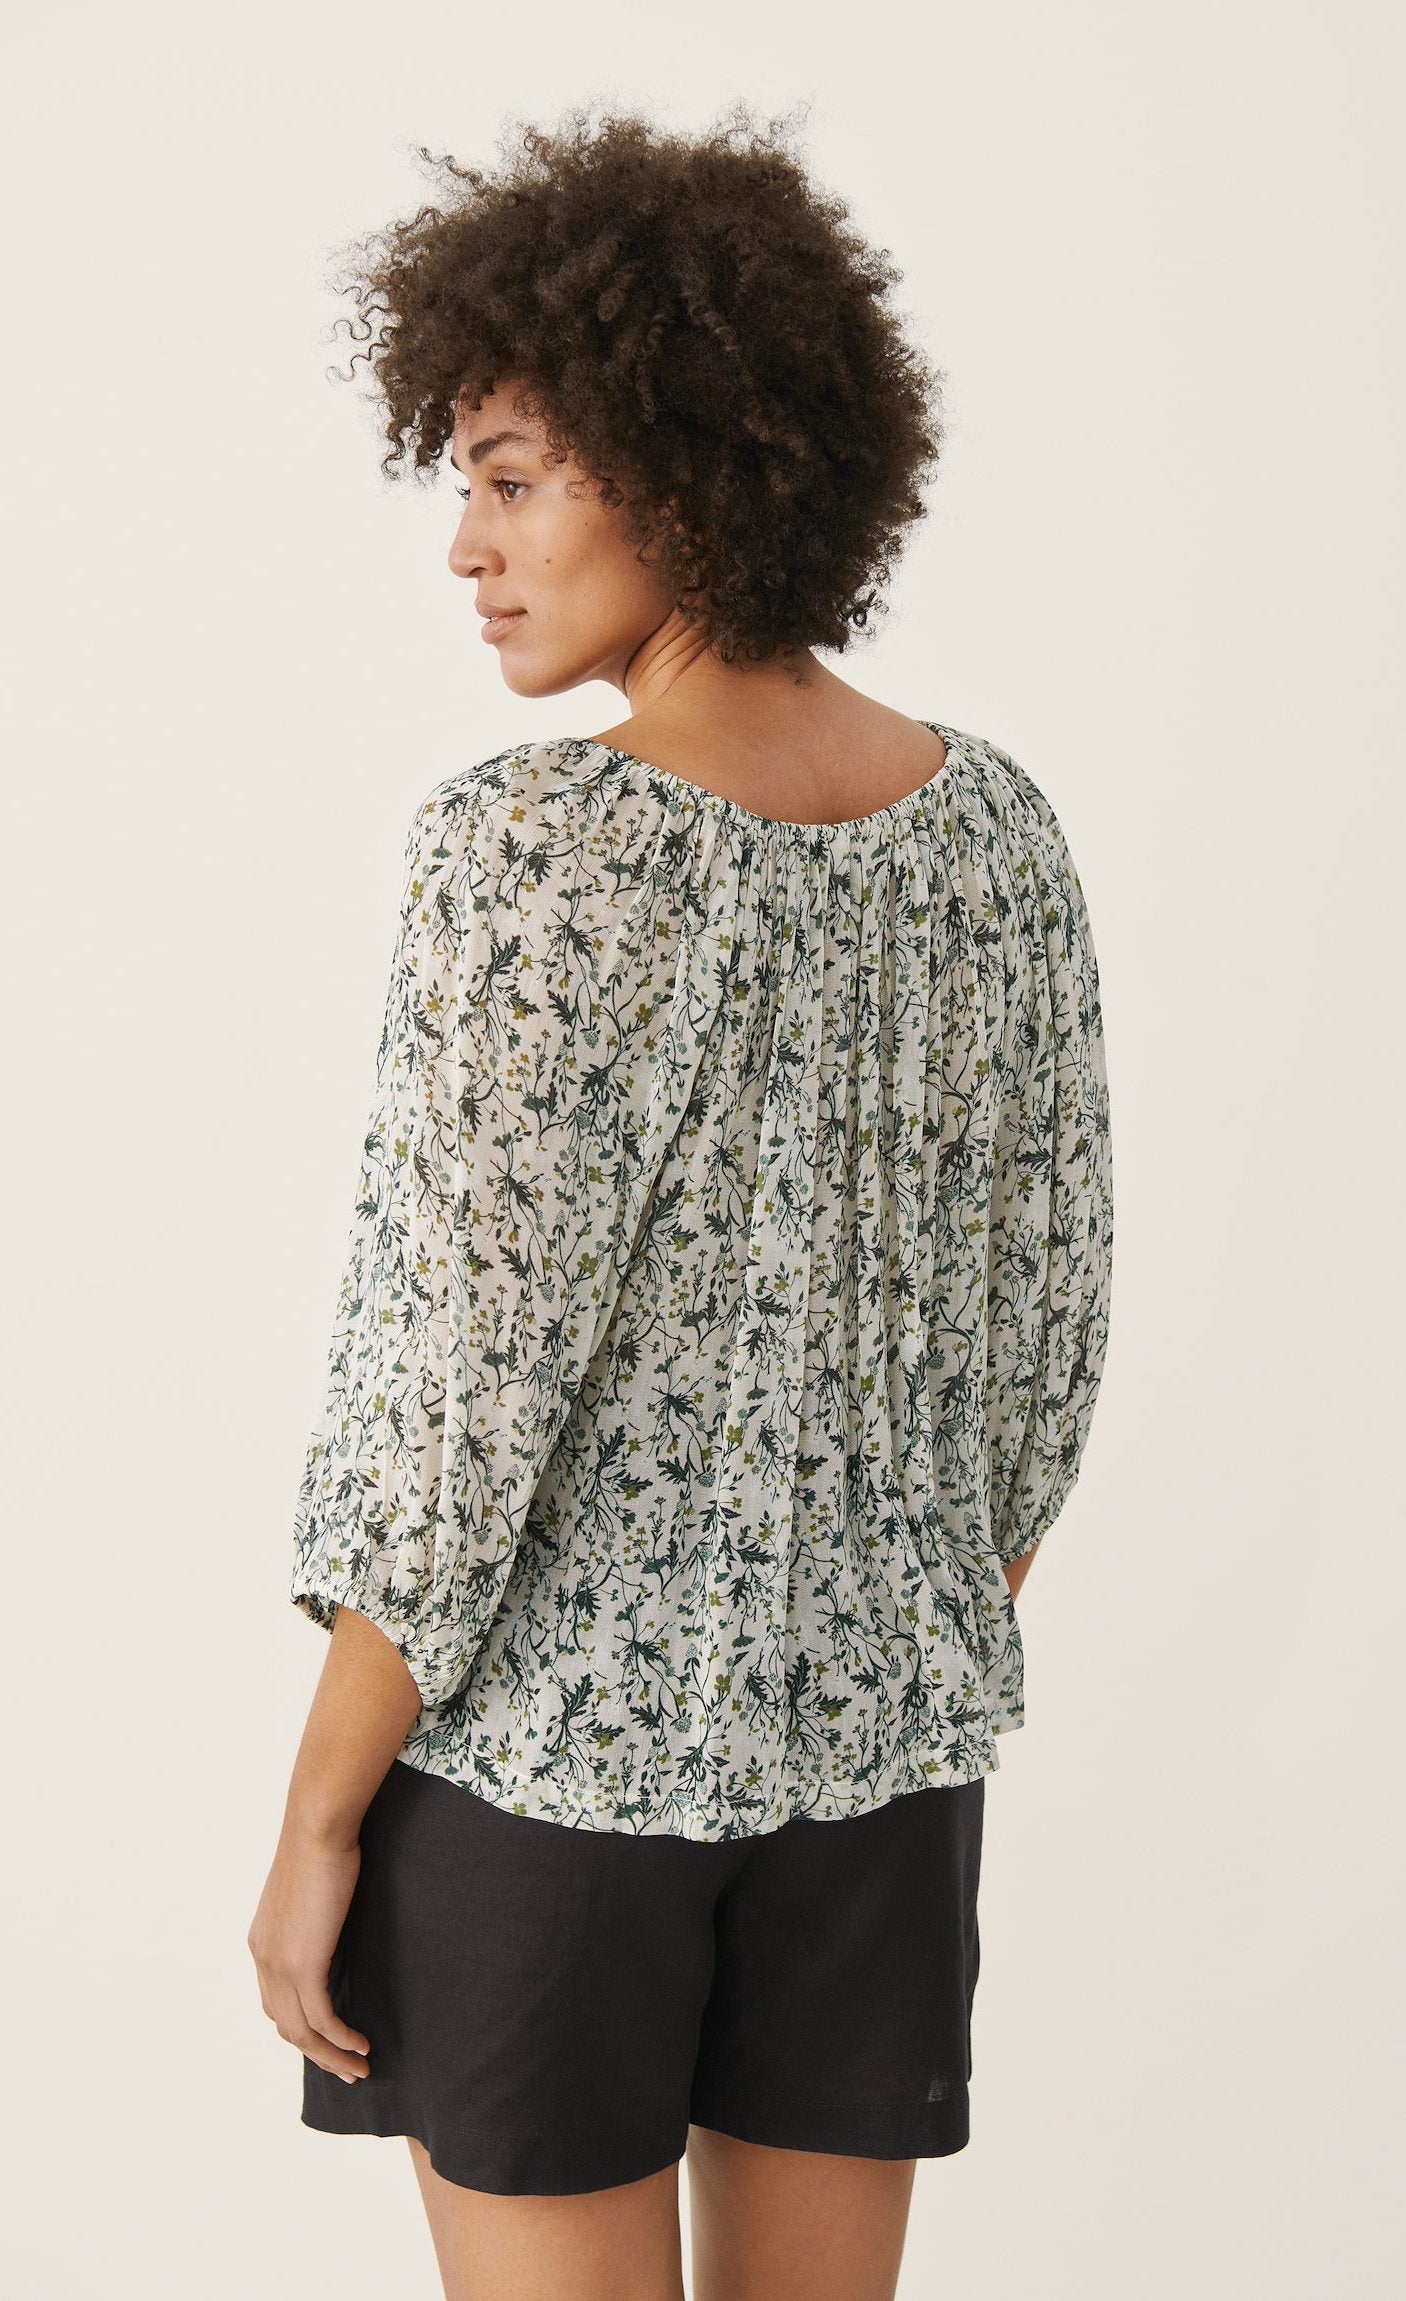 Back top half view of a woman wearing black shorts and the part two ingeborg floral top. This top has a small blue/green floral print, a gathered round neck, and 3/4 length wide sleeves.